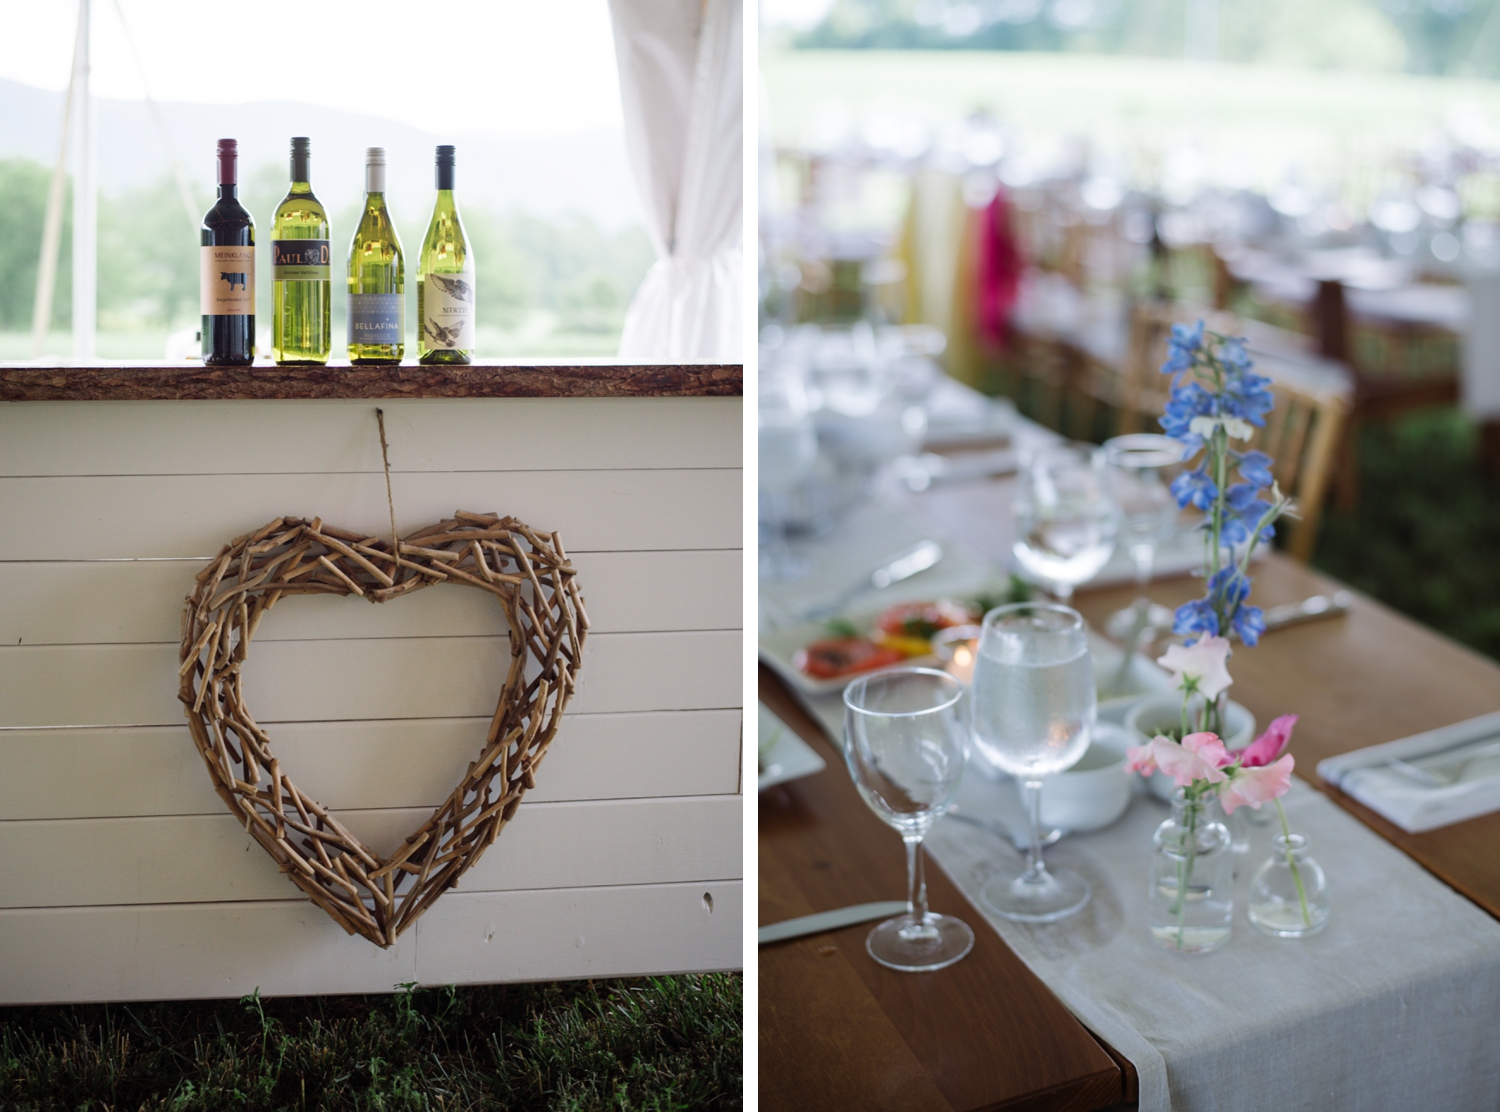 Rustic wedding details with wildflowers